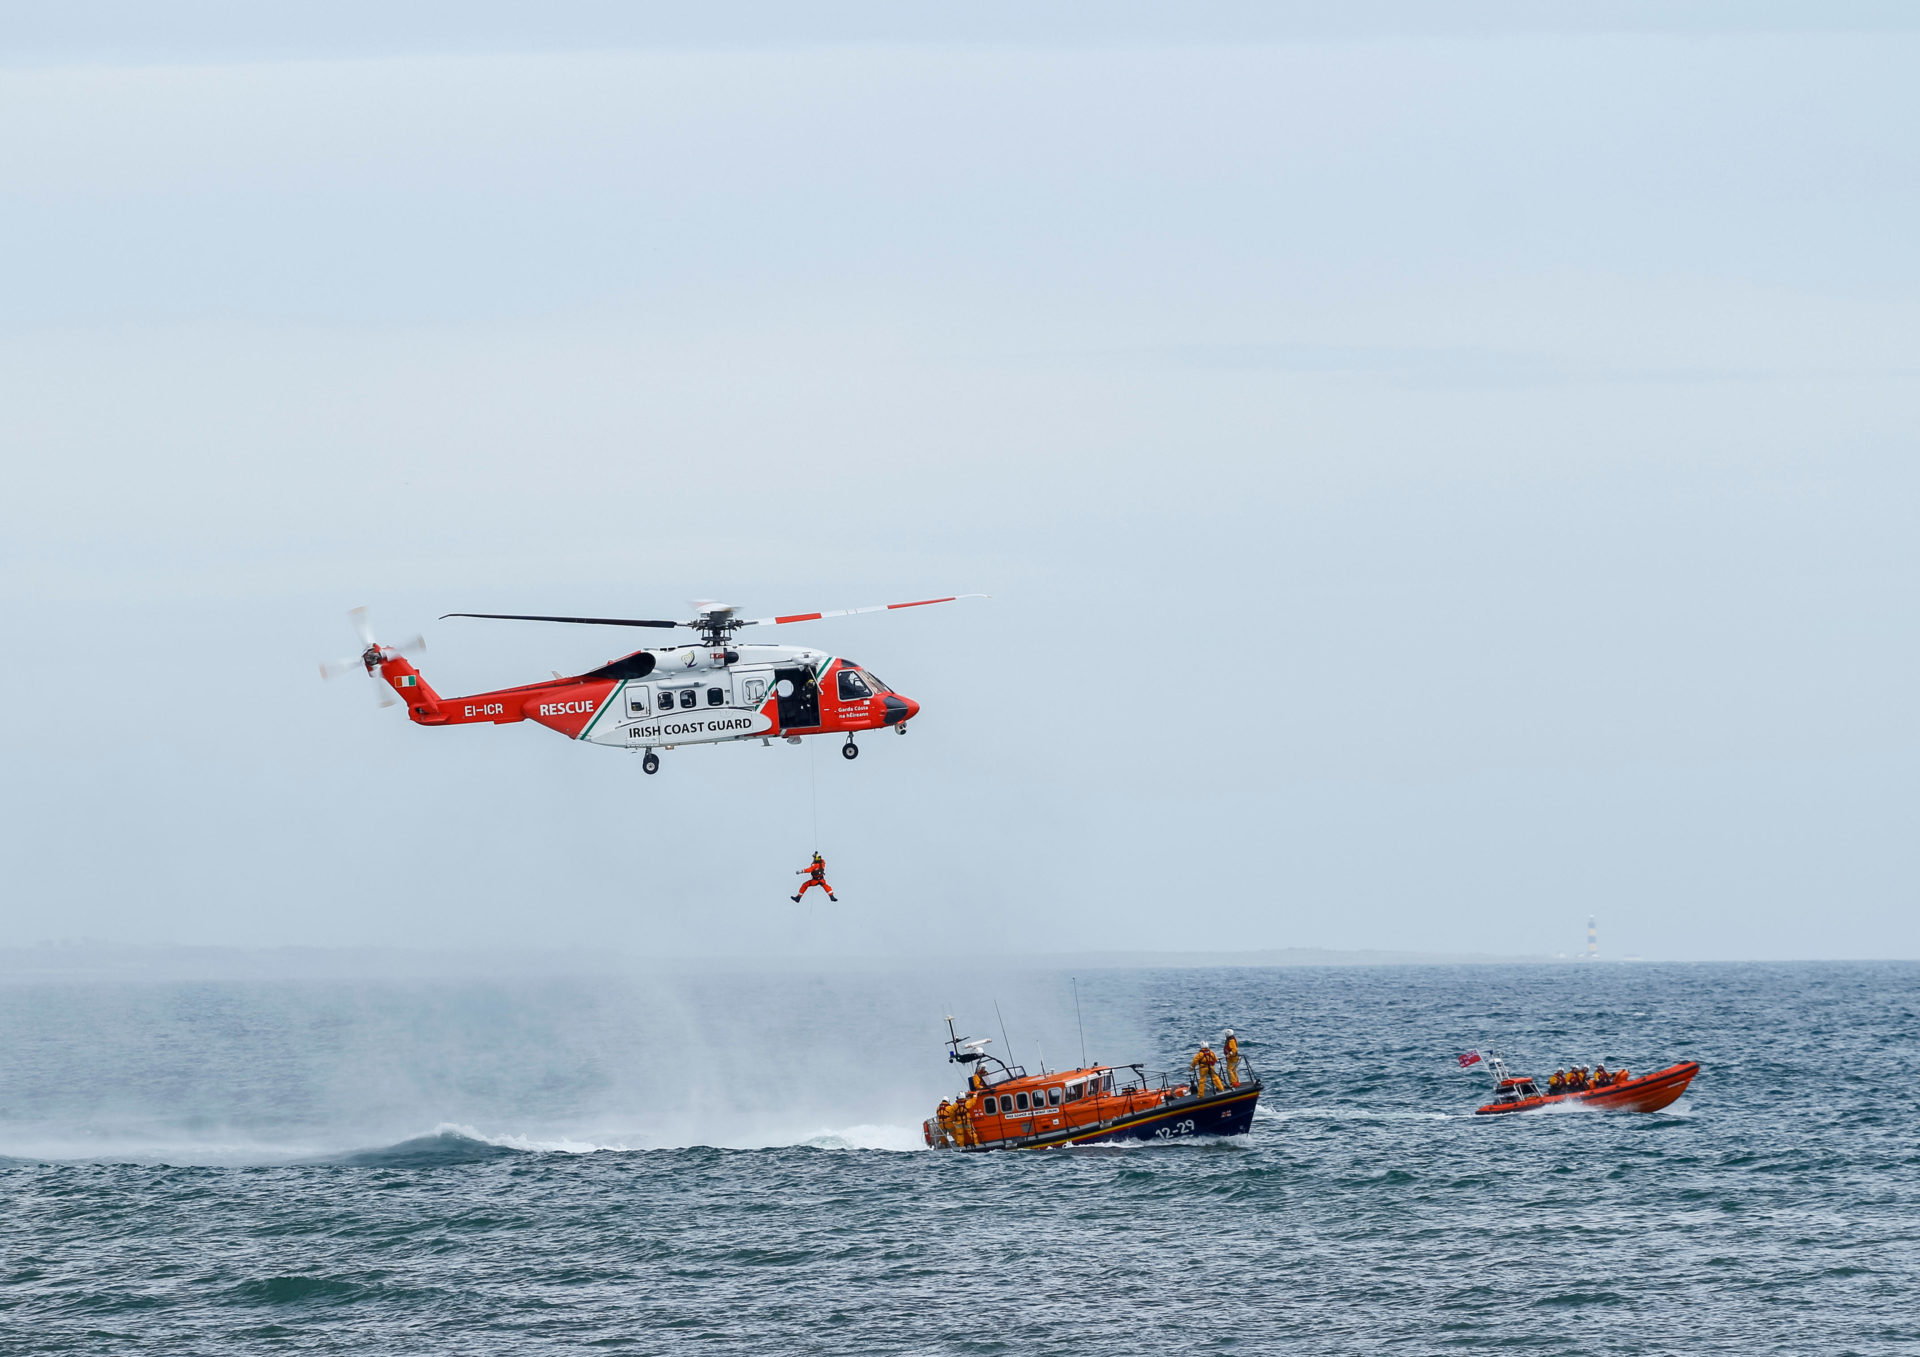 Irish Coast Guard Helicopter in exercise with RNLI Lifeboat